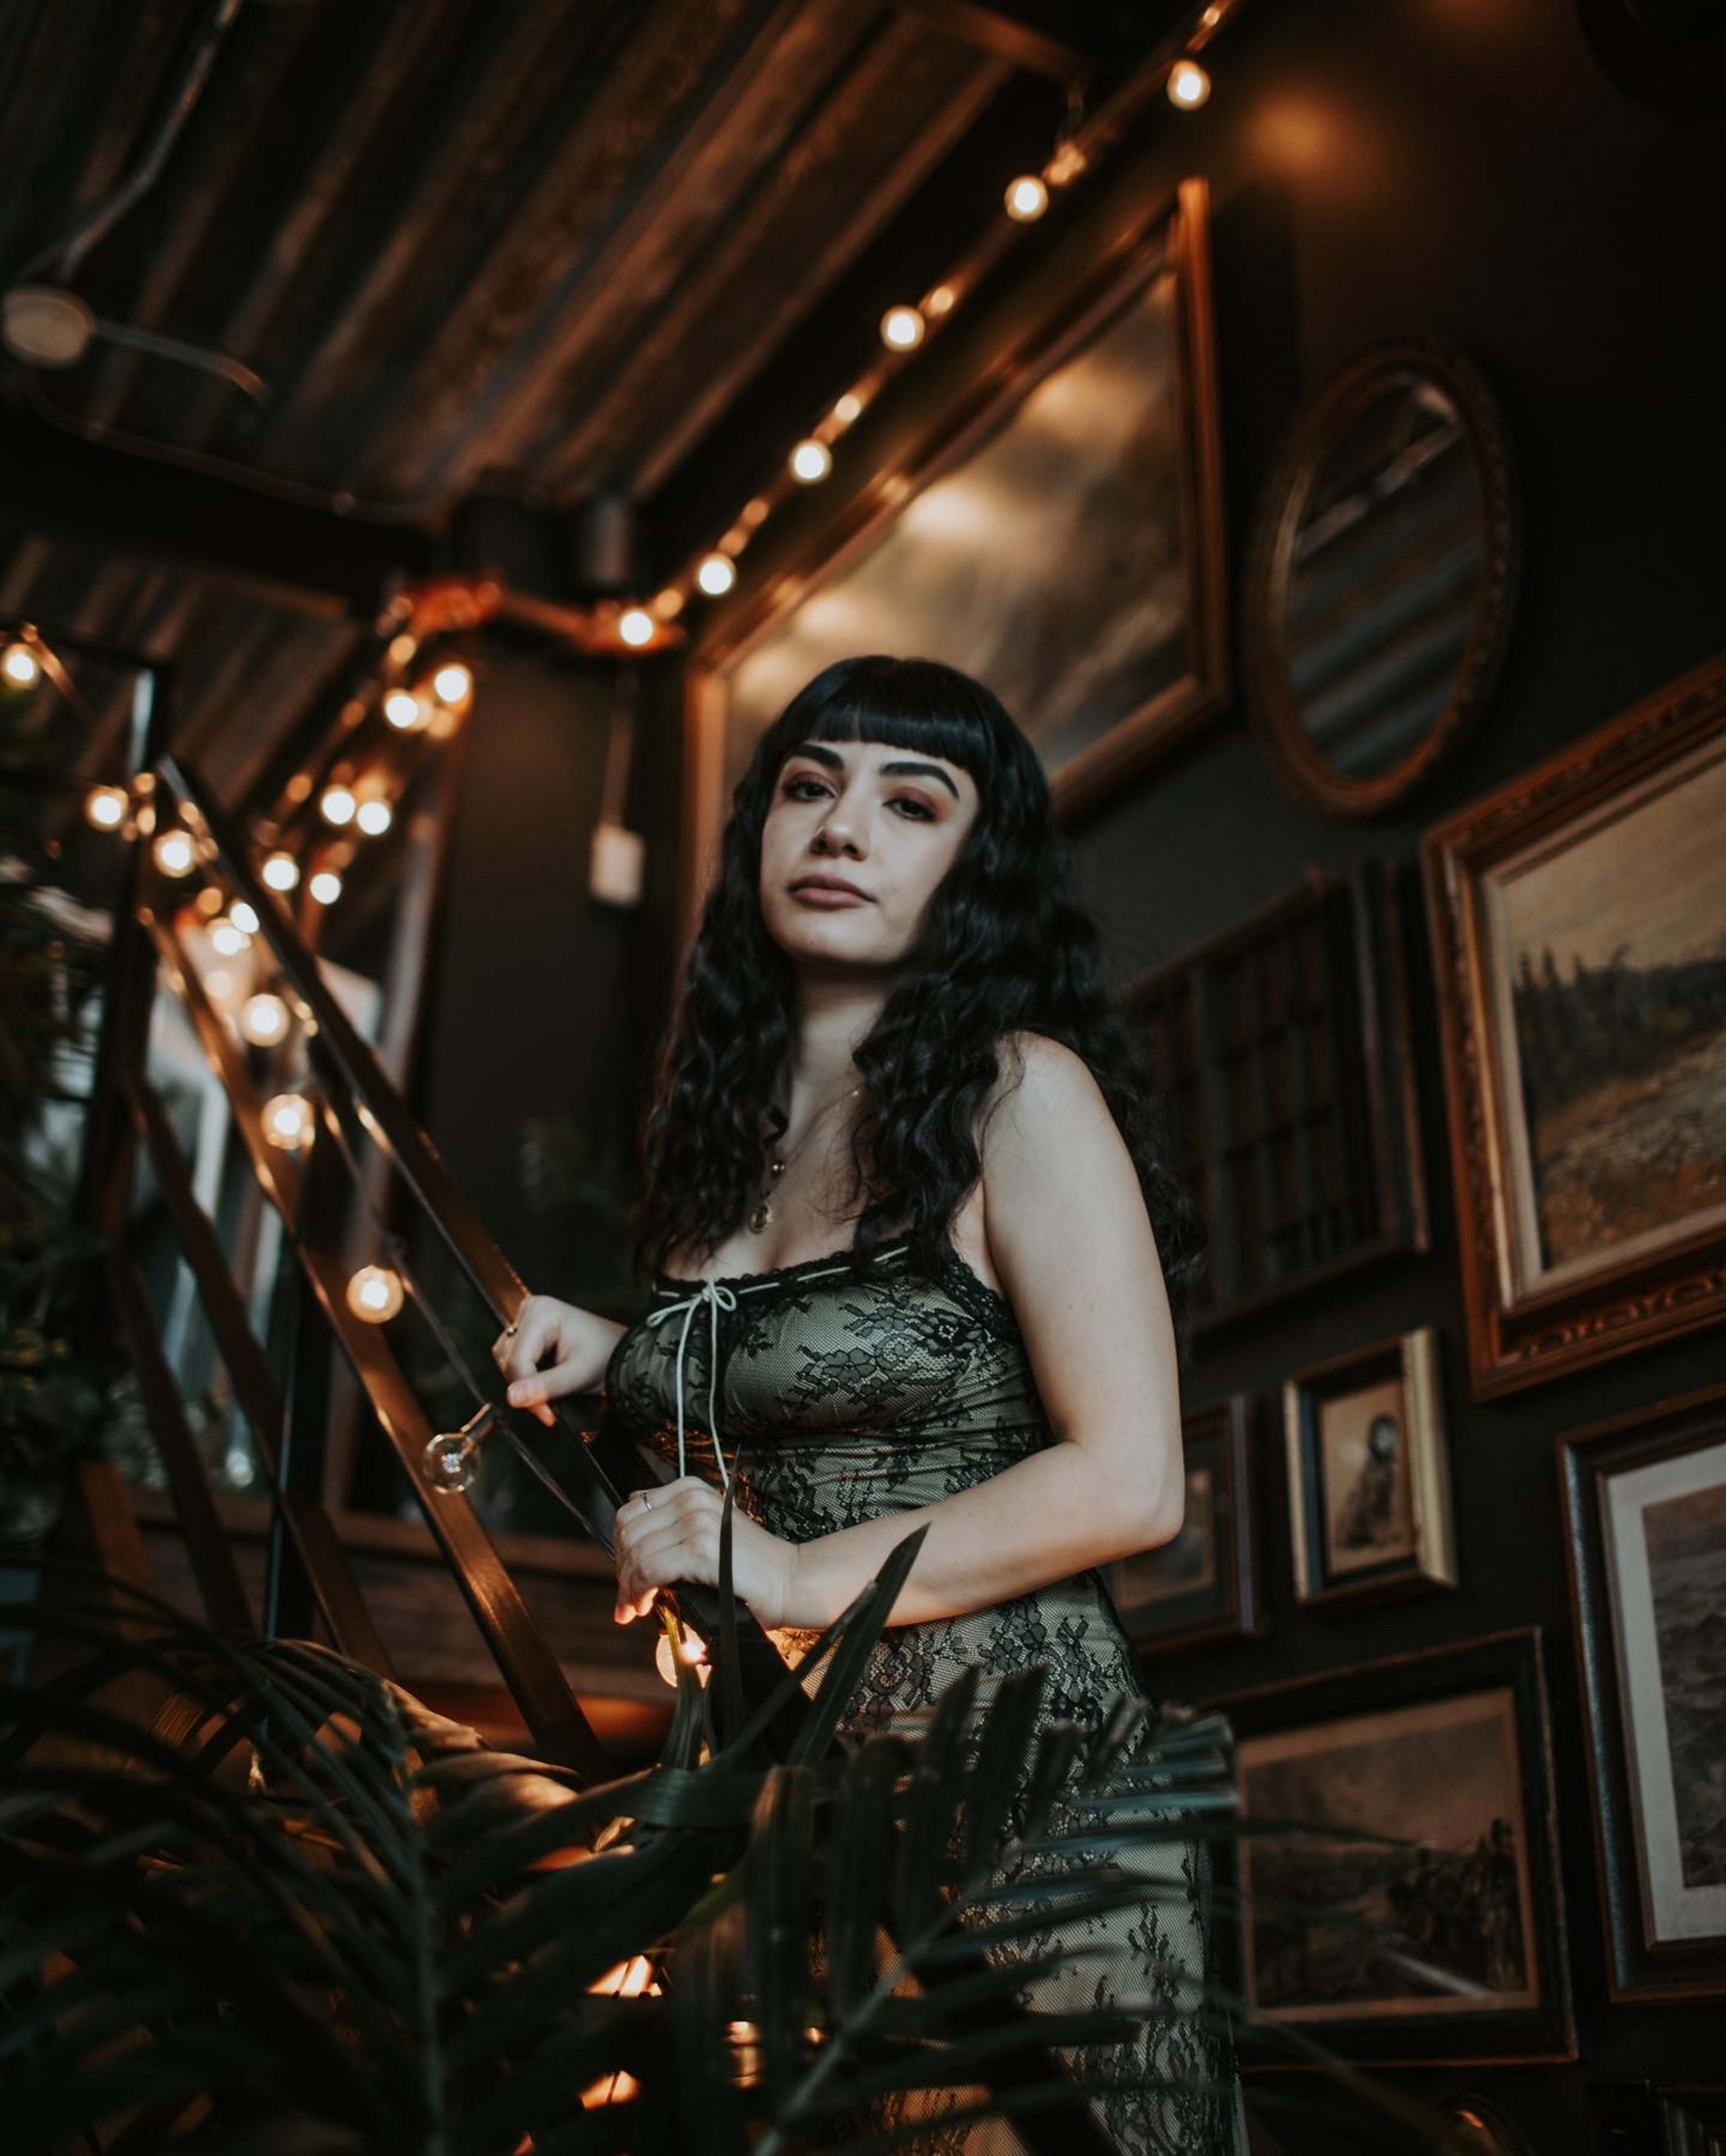 A fashion photo shoot with a woman in a green dress posing next to a staircase surrounded by plants.